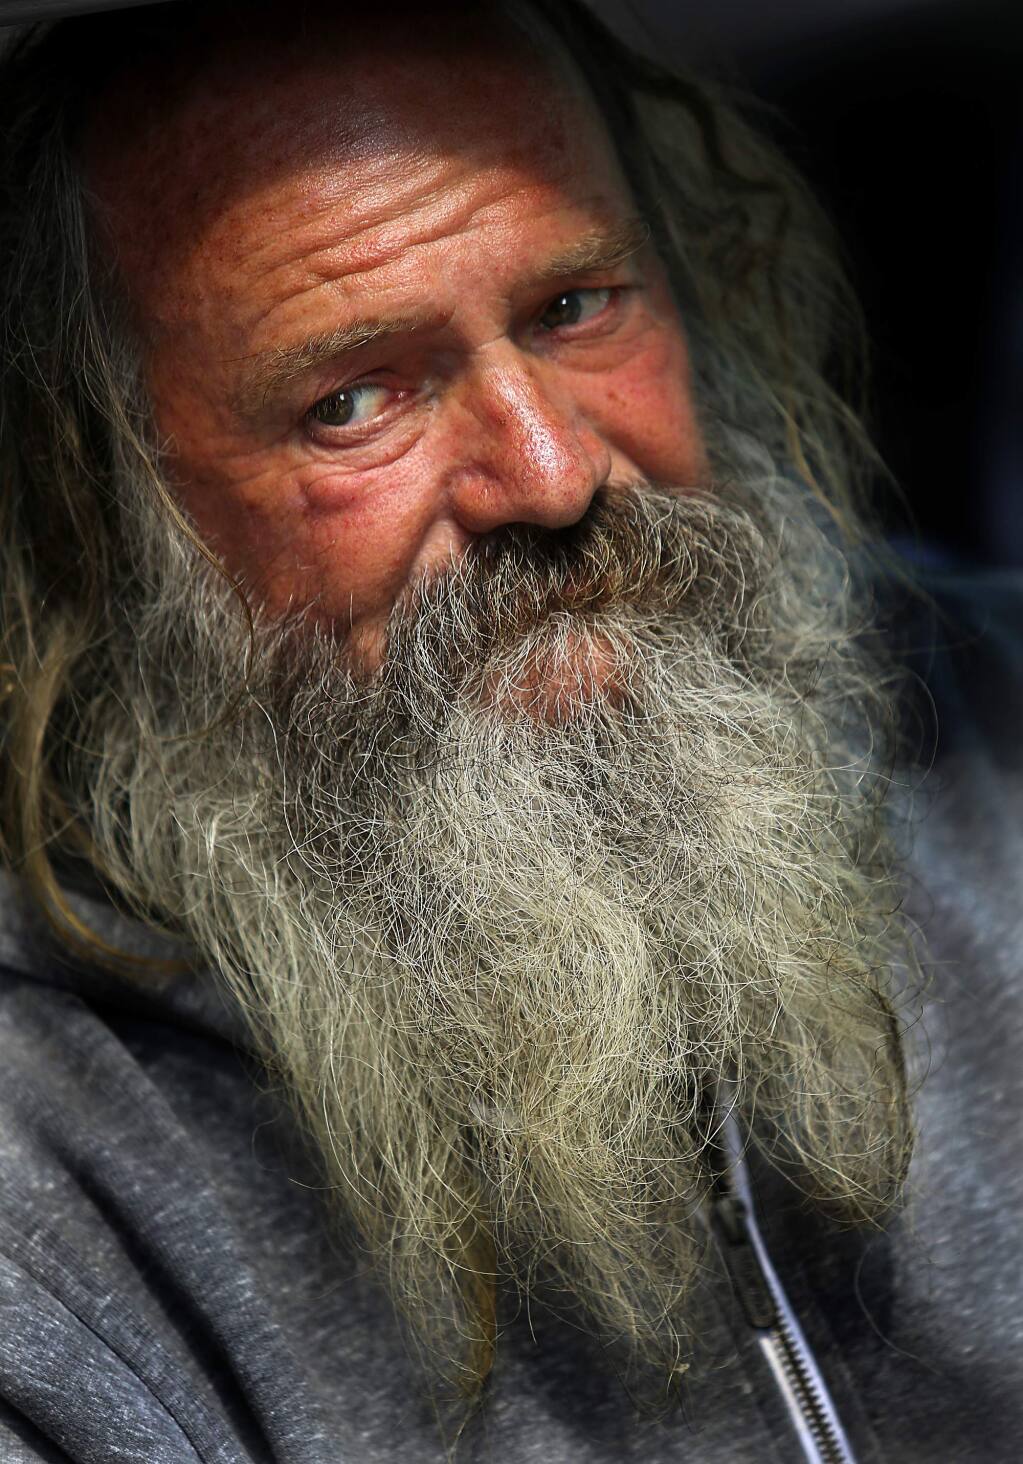 JOHN BURGESS / The Press Democrat A homeless man who declined to give his name has lived near the St. Vincent de Paul Society in Santa Rosa for the past 18 months. Sonoma County's most recent homeless count, on Jan. 23, found 3,107 people were homeless.